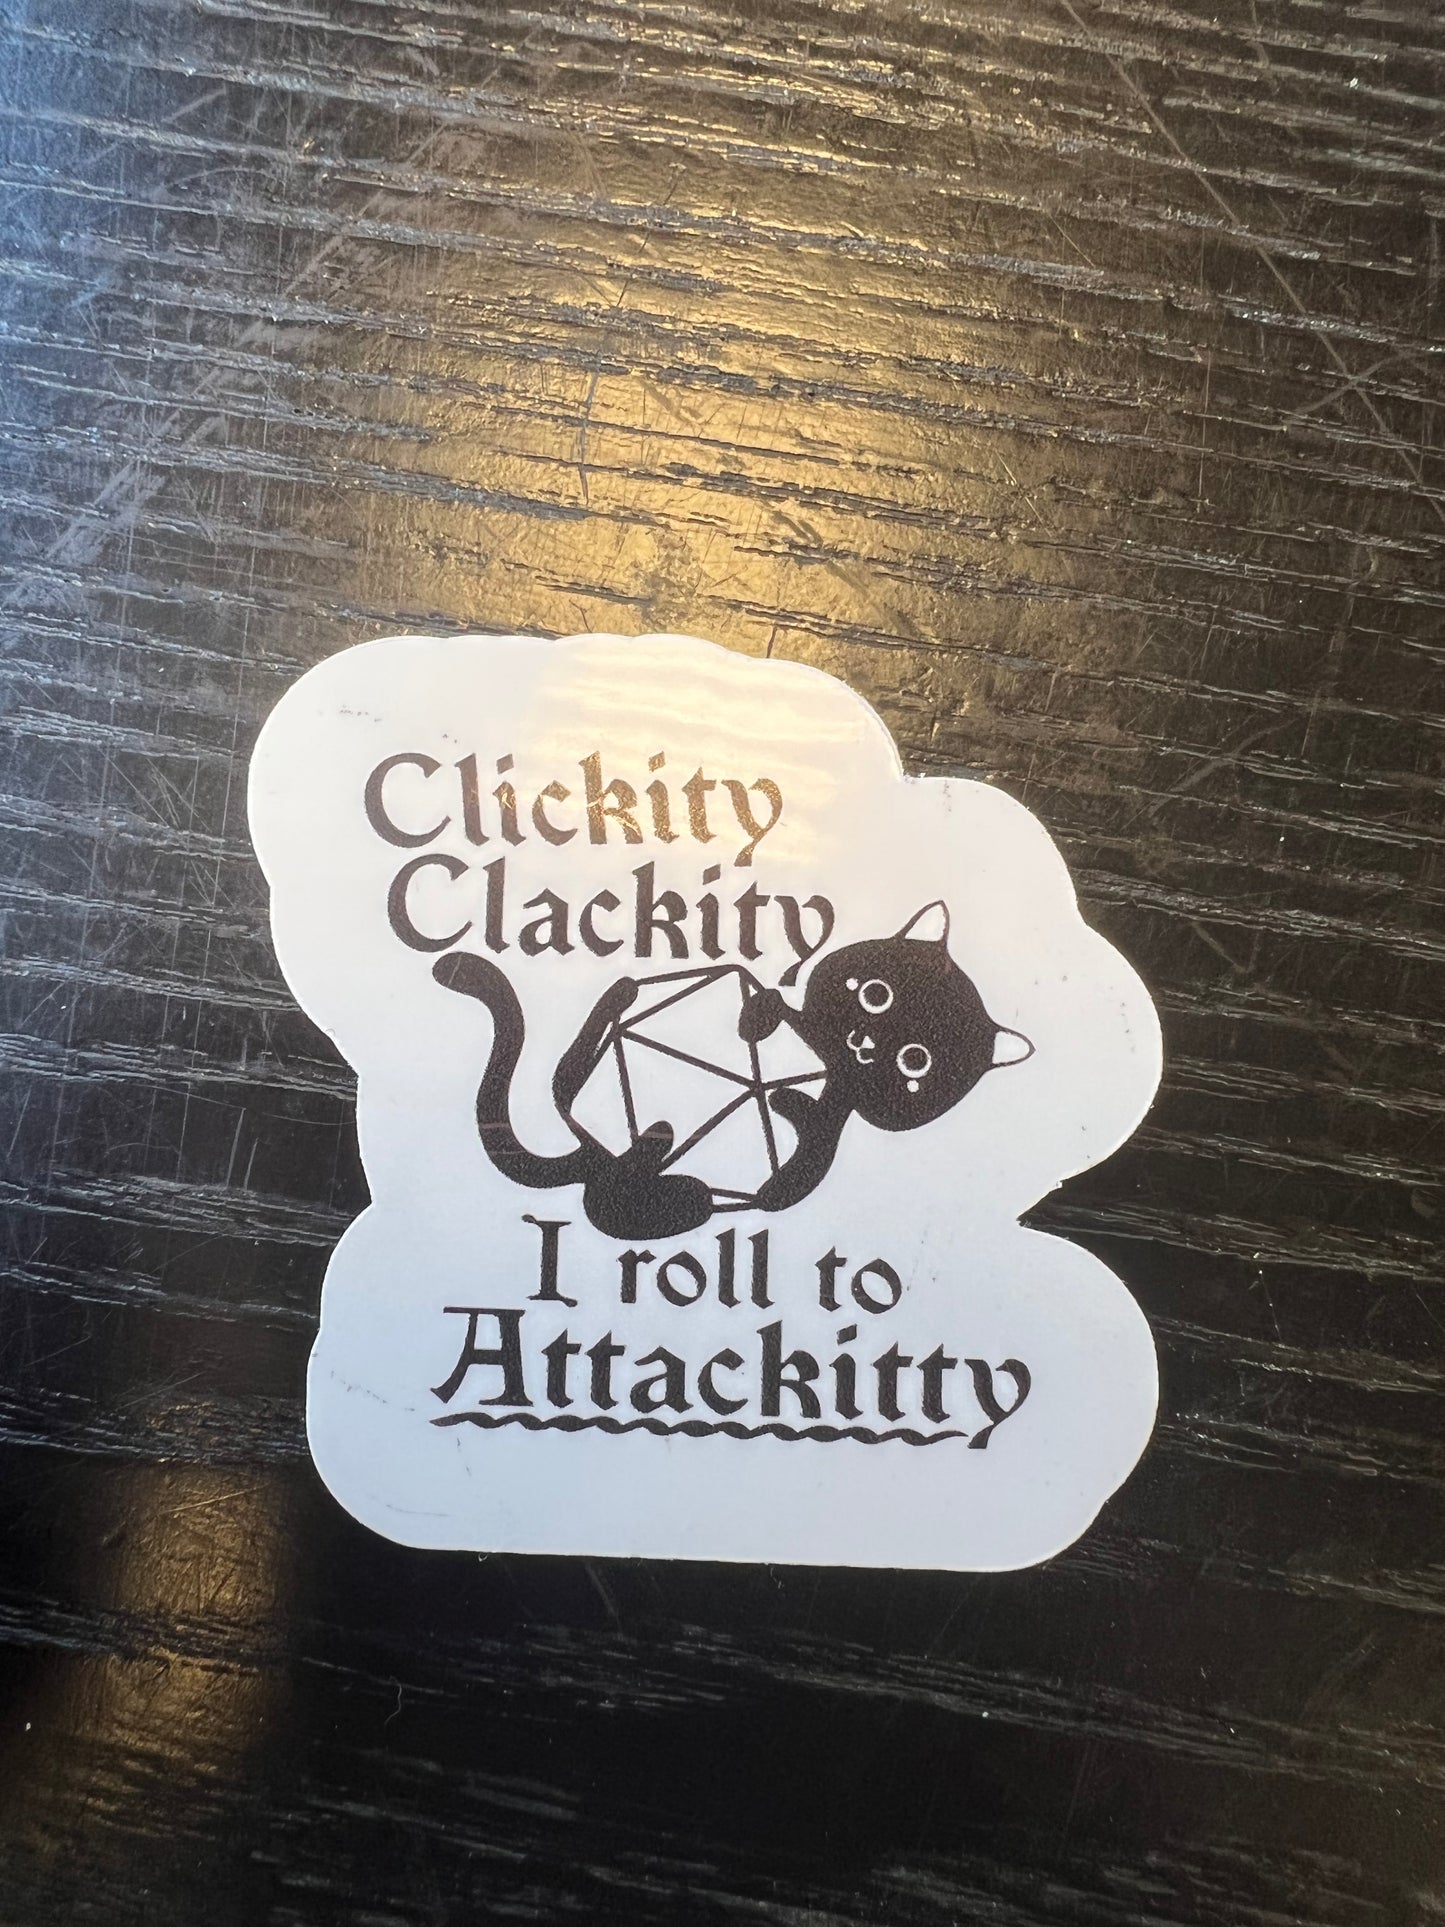 Clickity clackity I roll to attackitty! Handmade sticker